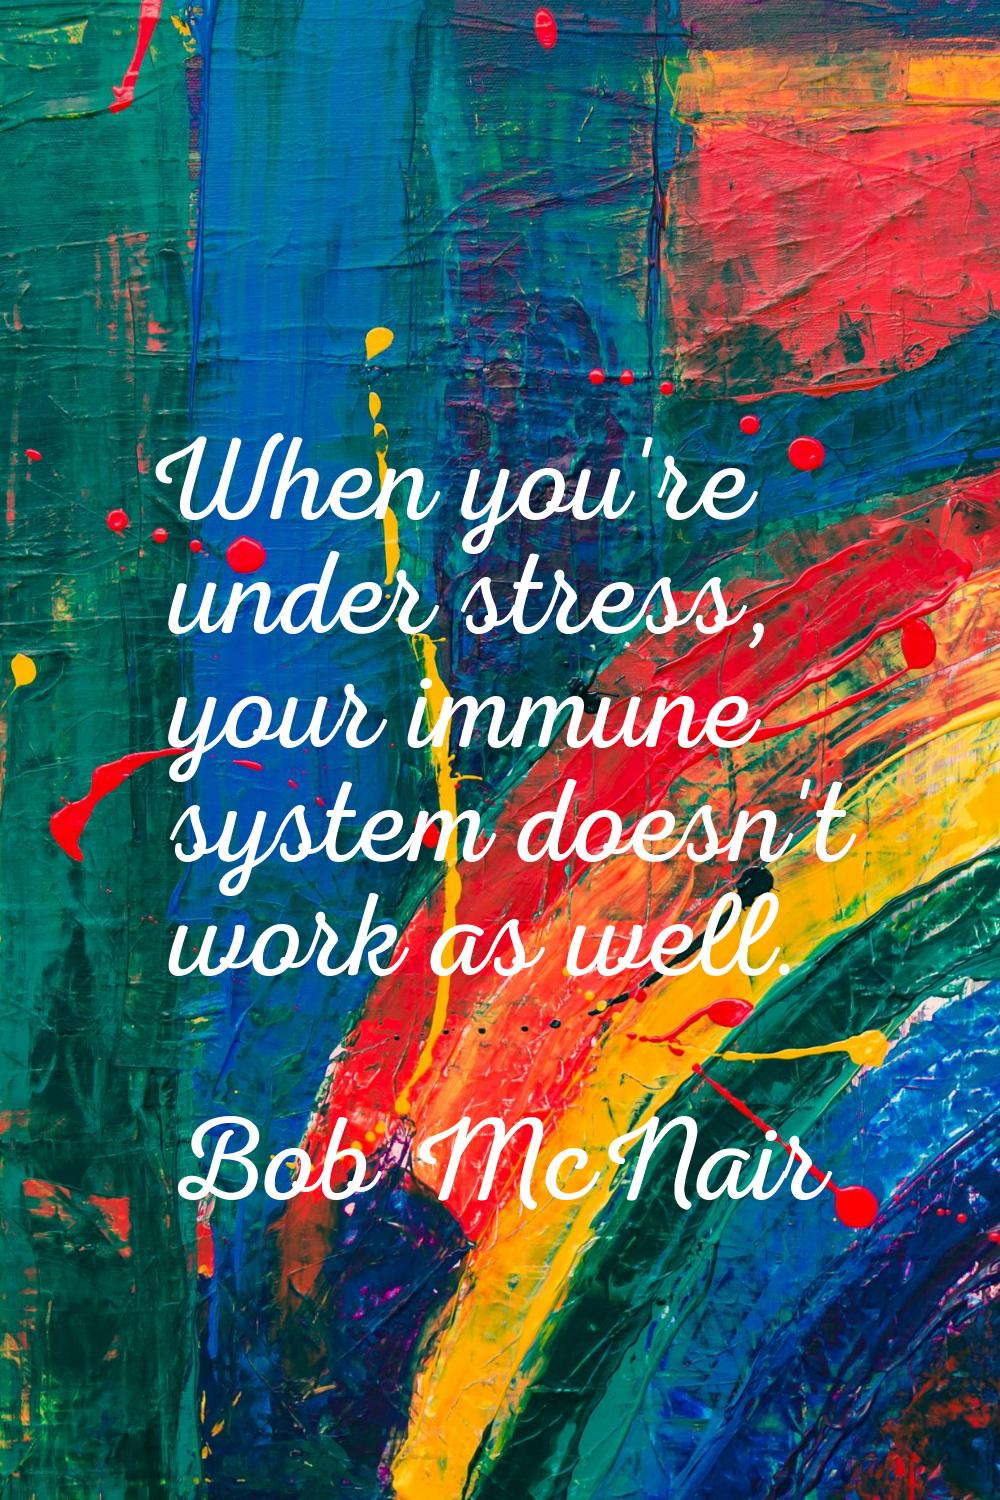 When you're under stress, your immune system doesn't work as well.